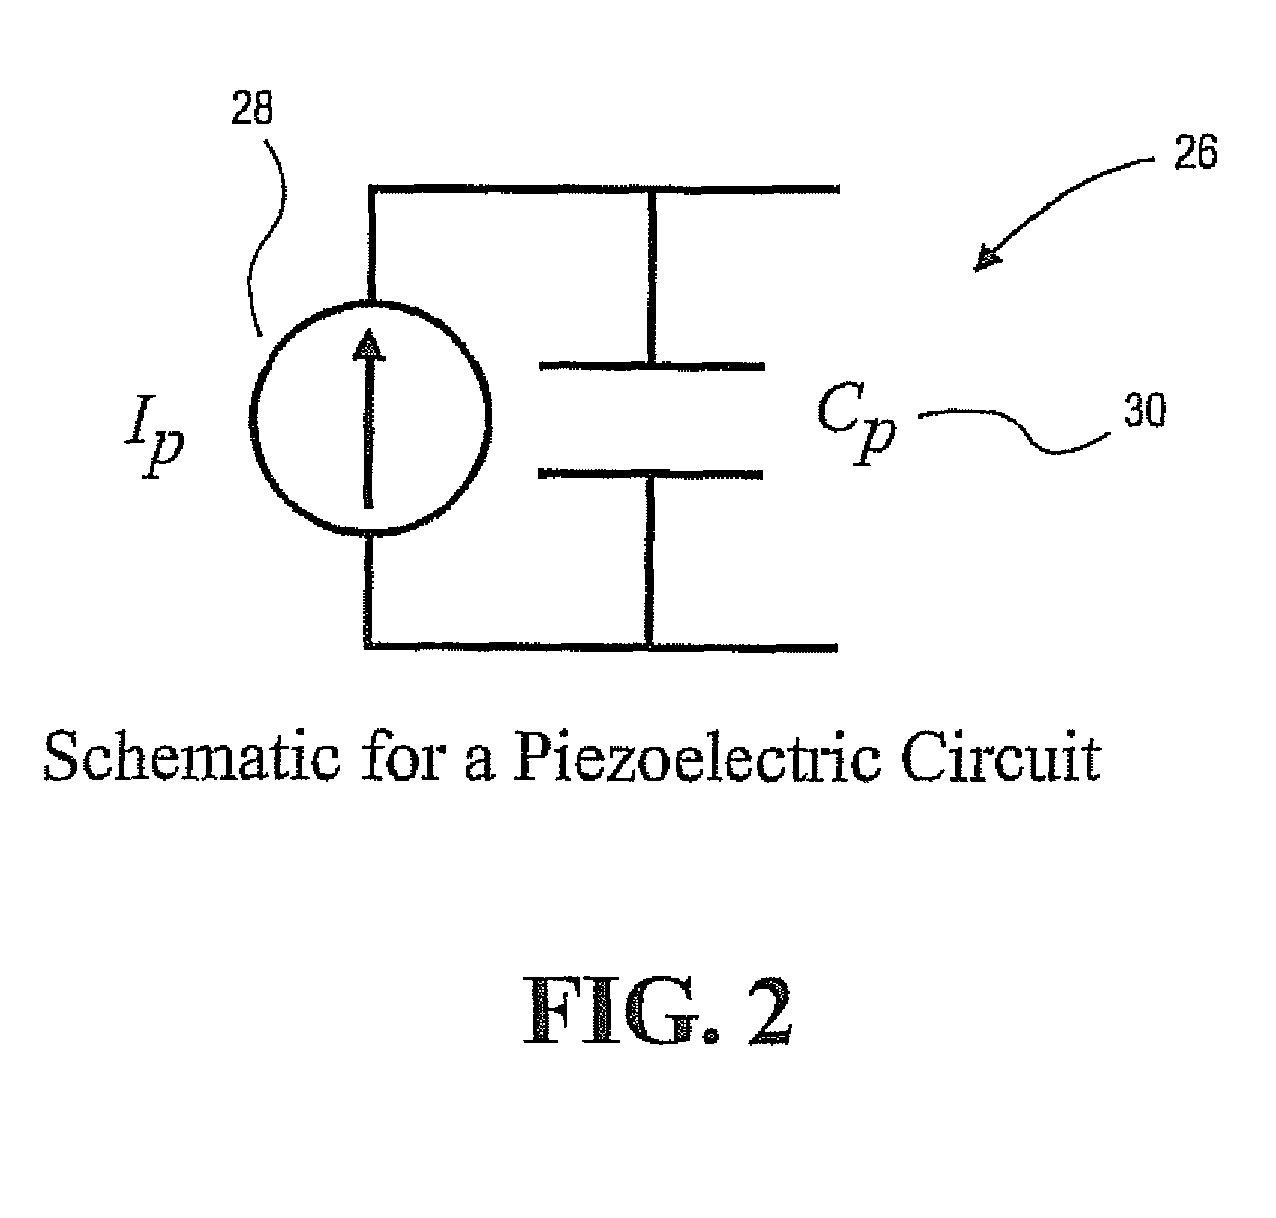 System and method for harvesting energy from environmental vibrations